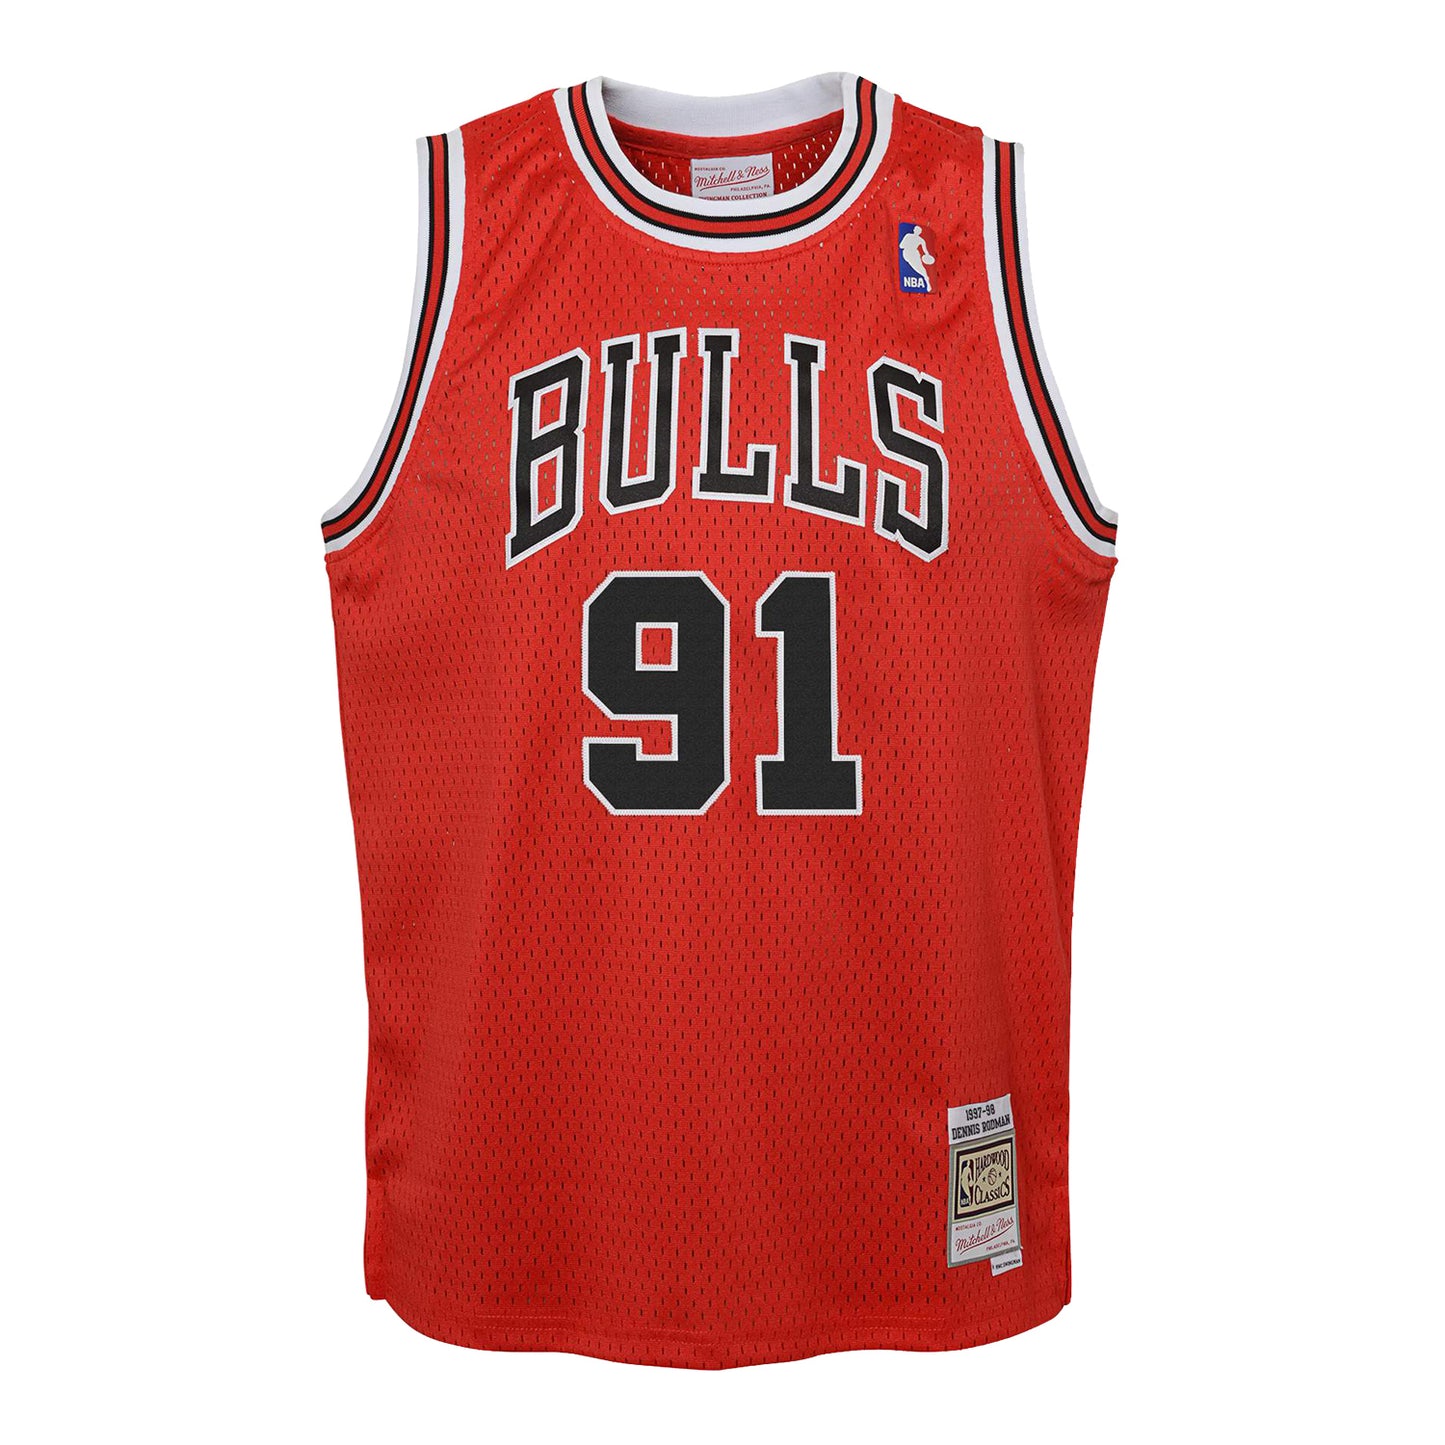 Youth Chicago Bulls Authentic Mitchell & Ness Dennis Rodman 1997-98 Je ...